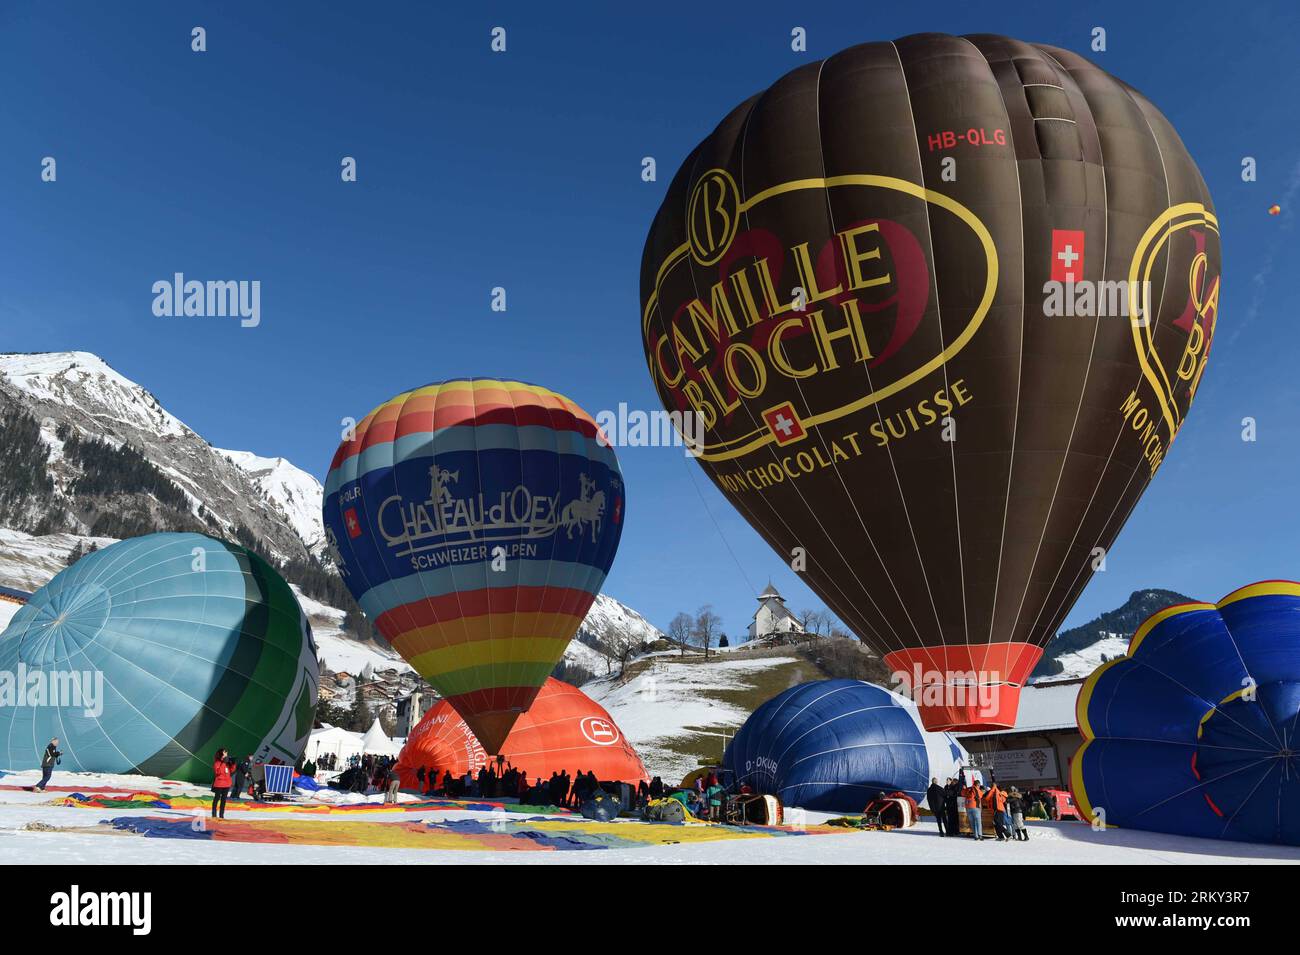 Bildnummer: 59137952  Datum: 26.01.2013  Copyright: imago/Xinhua (130126) -- CHATEAU-D OEX, Jan. 26, 2013 (Xinhua) -- Balloons wait to take off at the 35th International Ballon Festival in Chateau-d Oex, Switzerland, Jan. 26, 2013. The 9-day ballon festival kicked off here on Saturday with the participation of over 80 balloons from 15 countries and regions. (Xinhua/Wang Siwei)(zf) SWITZERLAND-CHATEAU-D OEX-INTERNATIONAL BALLOON FESTIVAL PUBLICATIONxNOTxINxCHN Gesellschaft Ballon Heissluftballon Ballonfestival Ballonfahrt Alpen x0x xst 2013 quer premiumd      59137952 Date 26 01 2013 Copyright Stock Photo